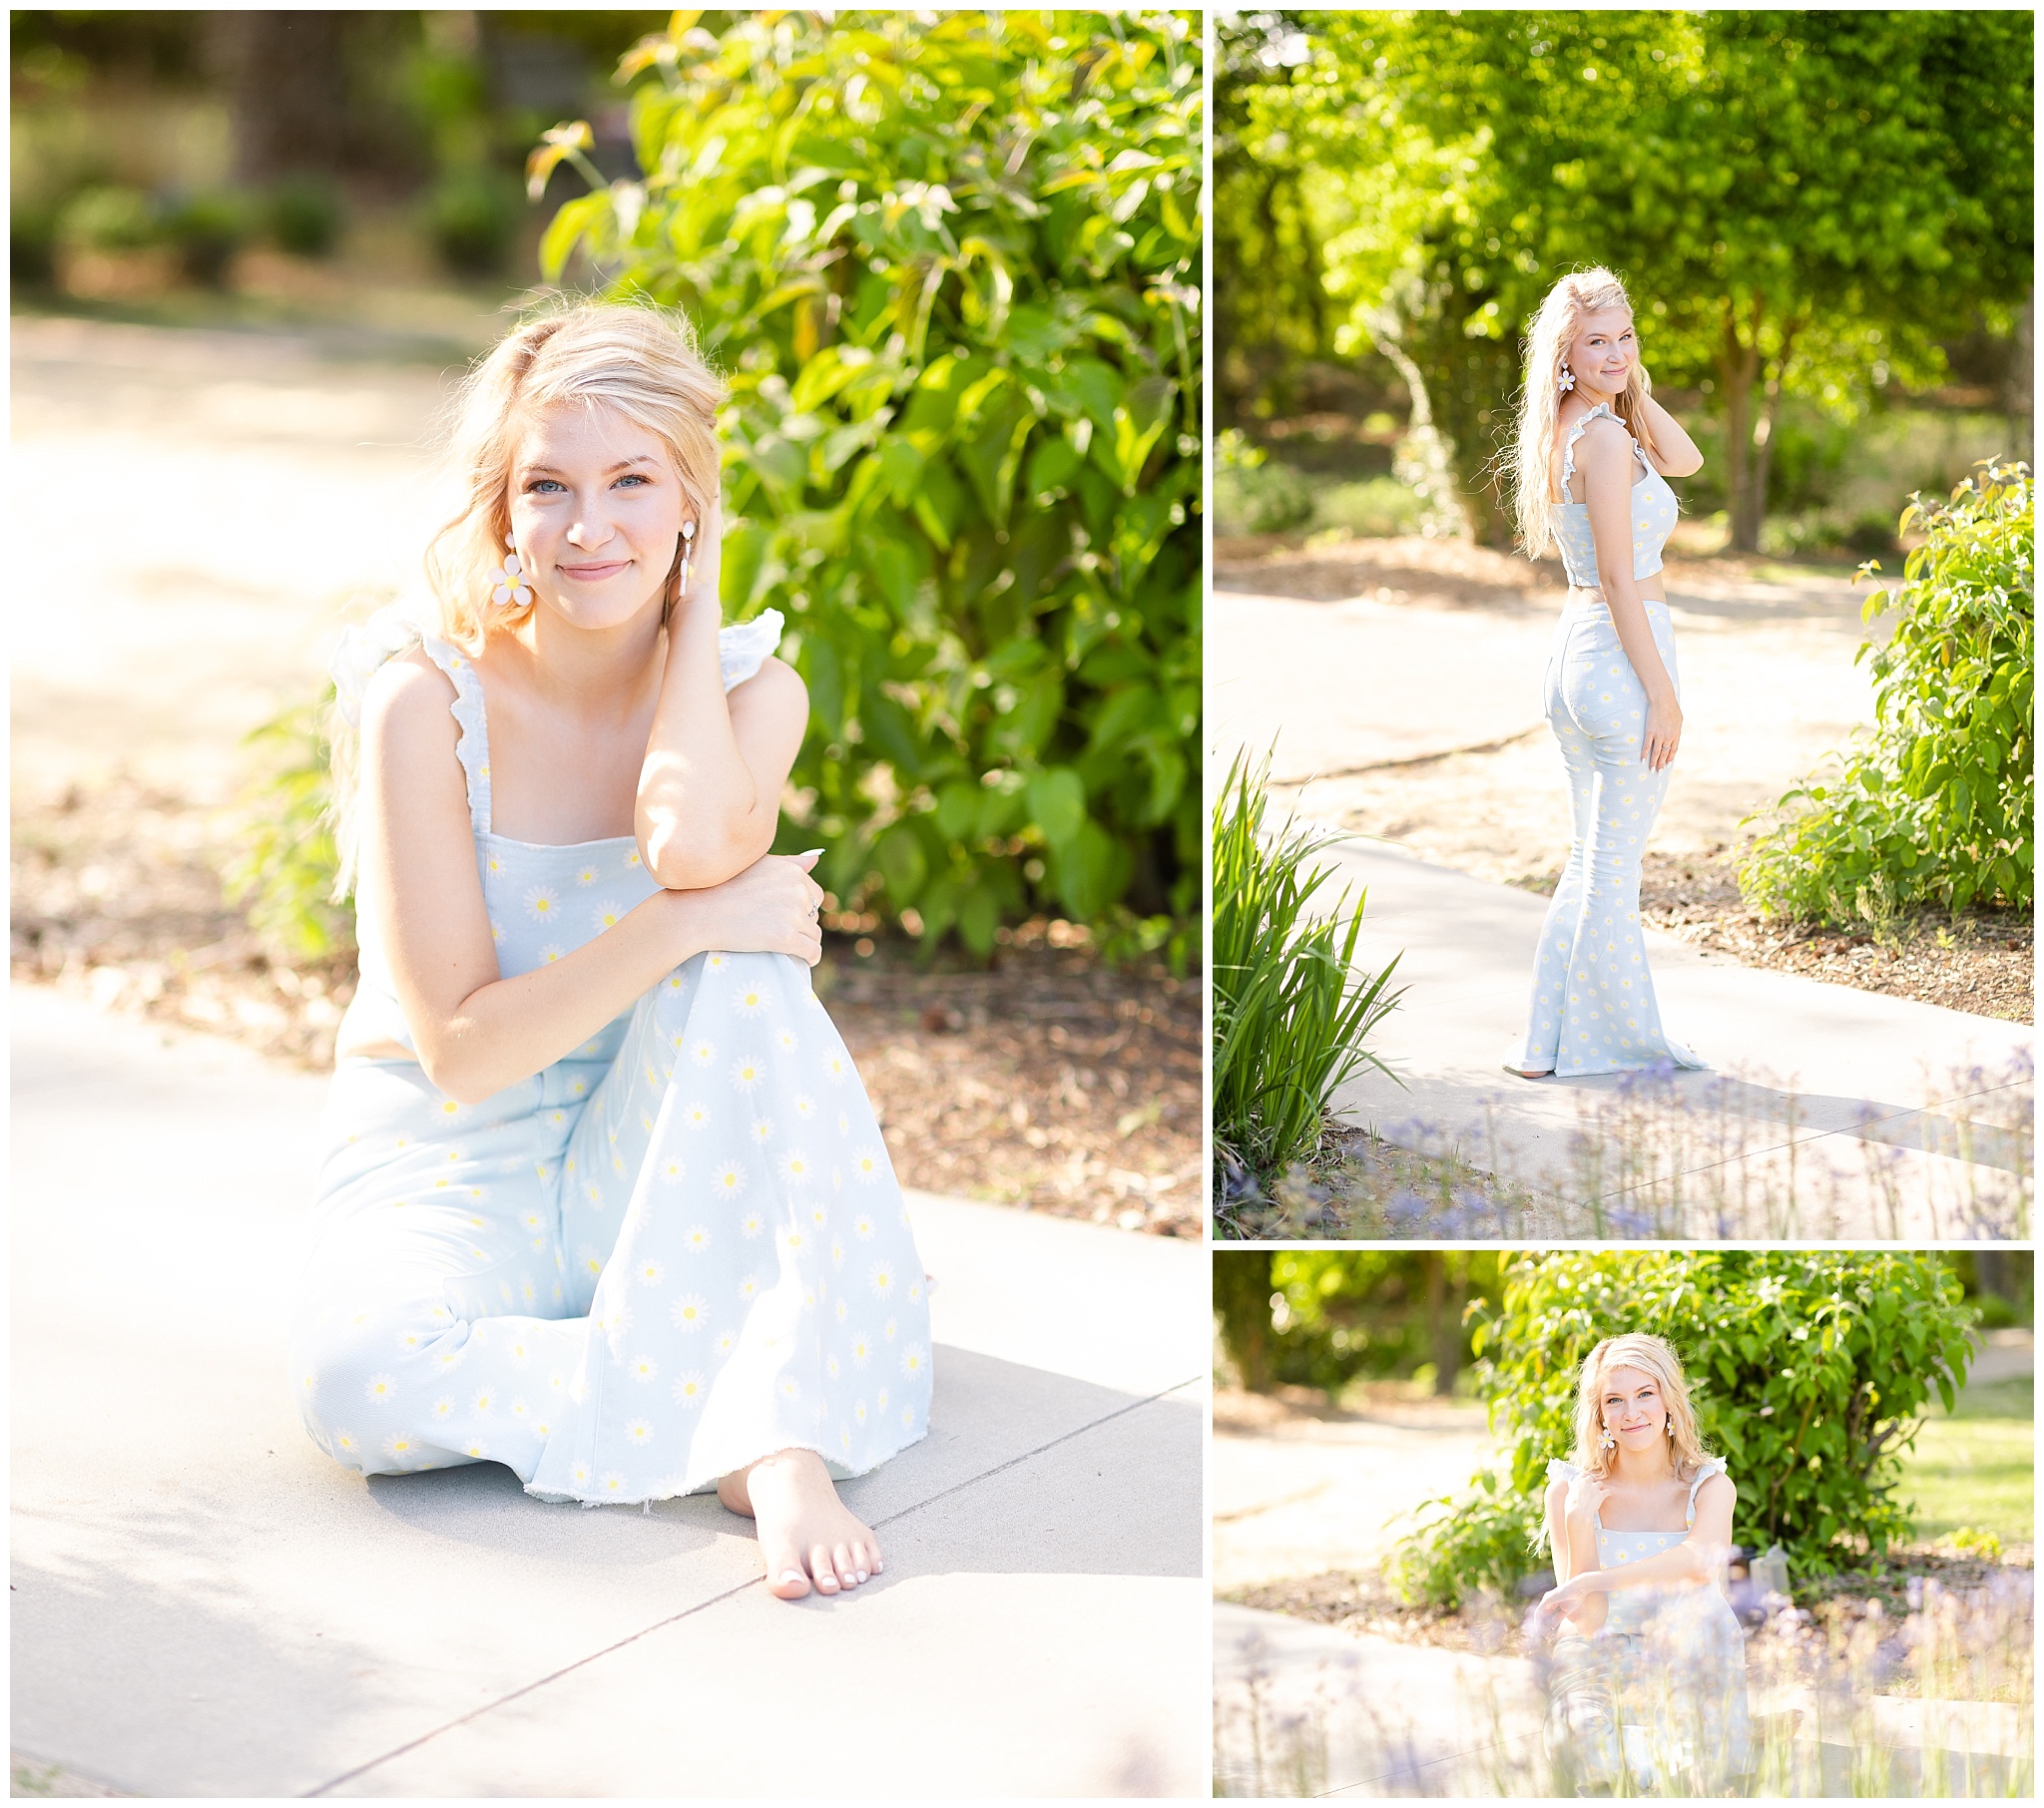 Senior session at the Wilson Botanical Gardens with Casey W. Childers Photography.